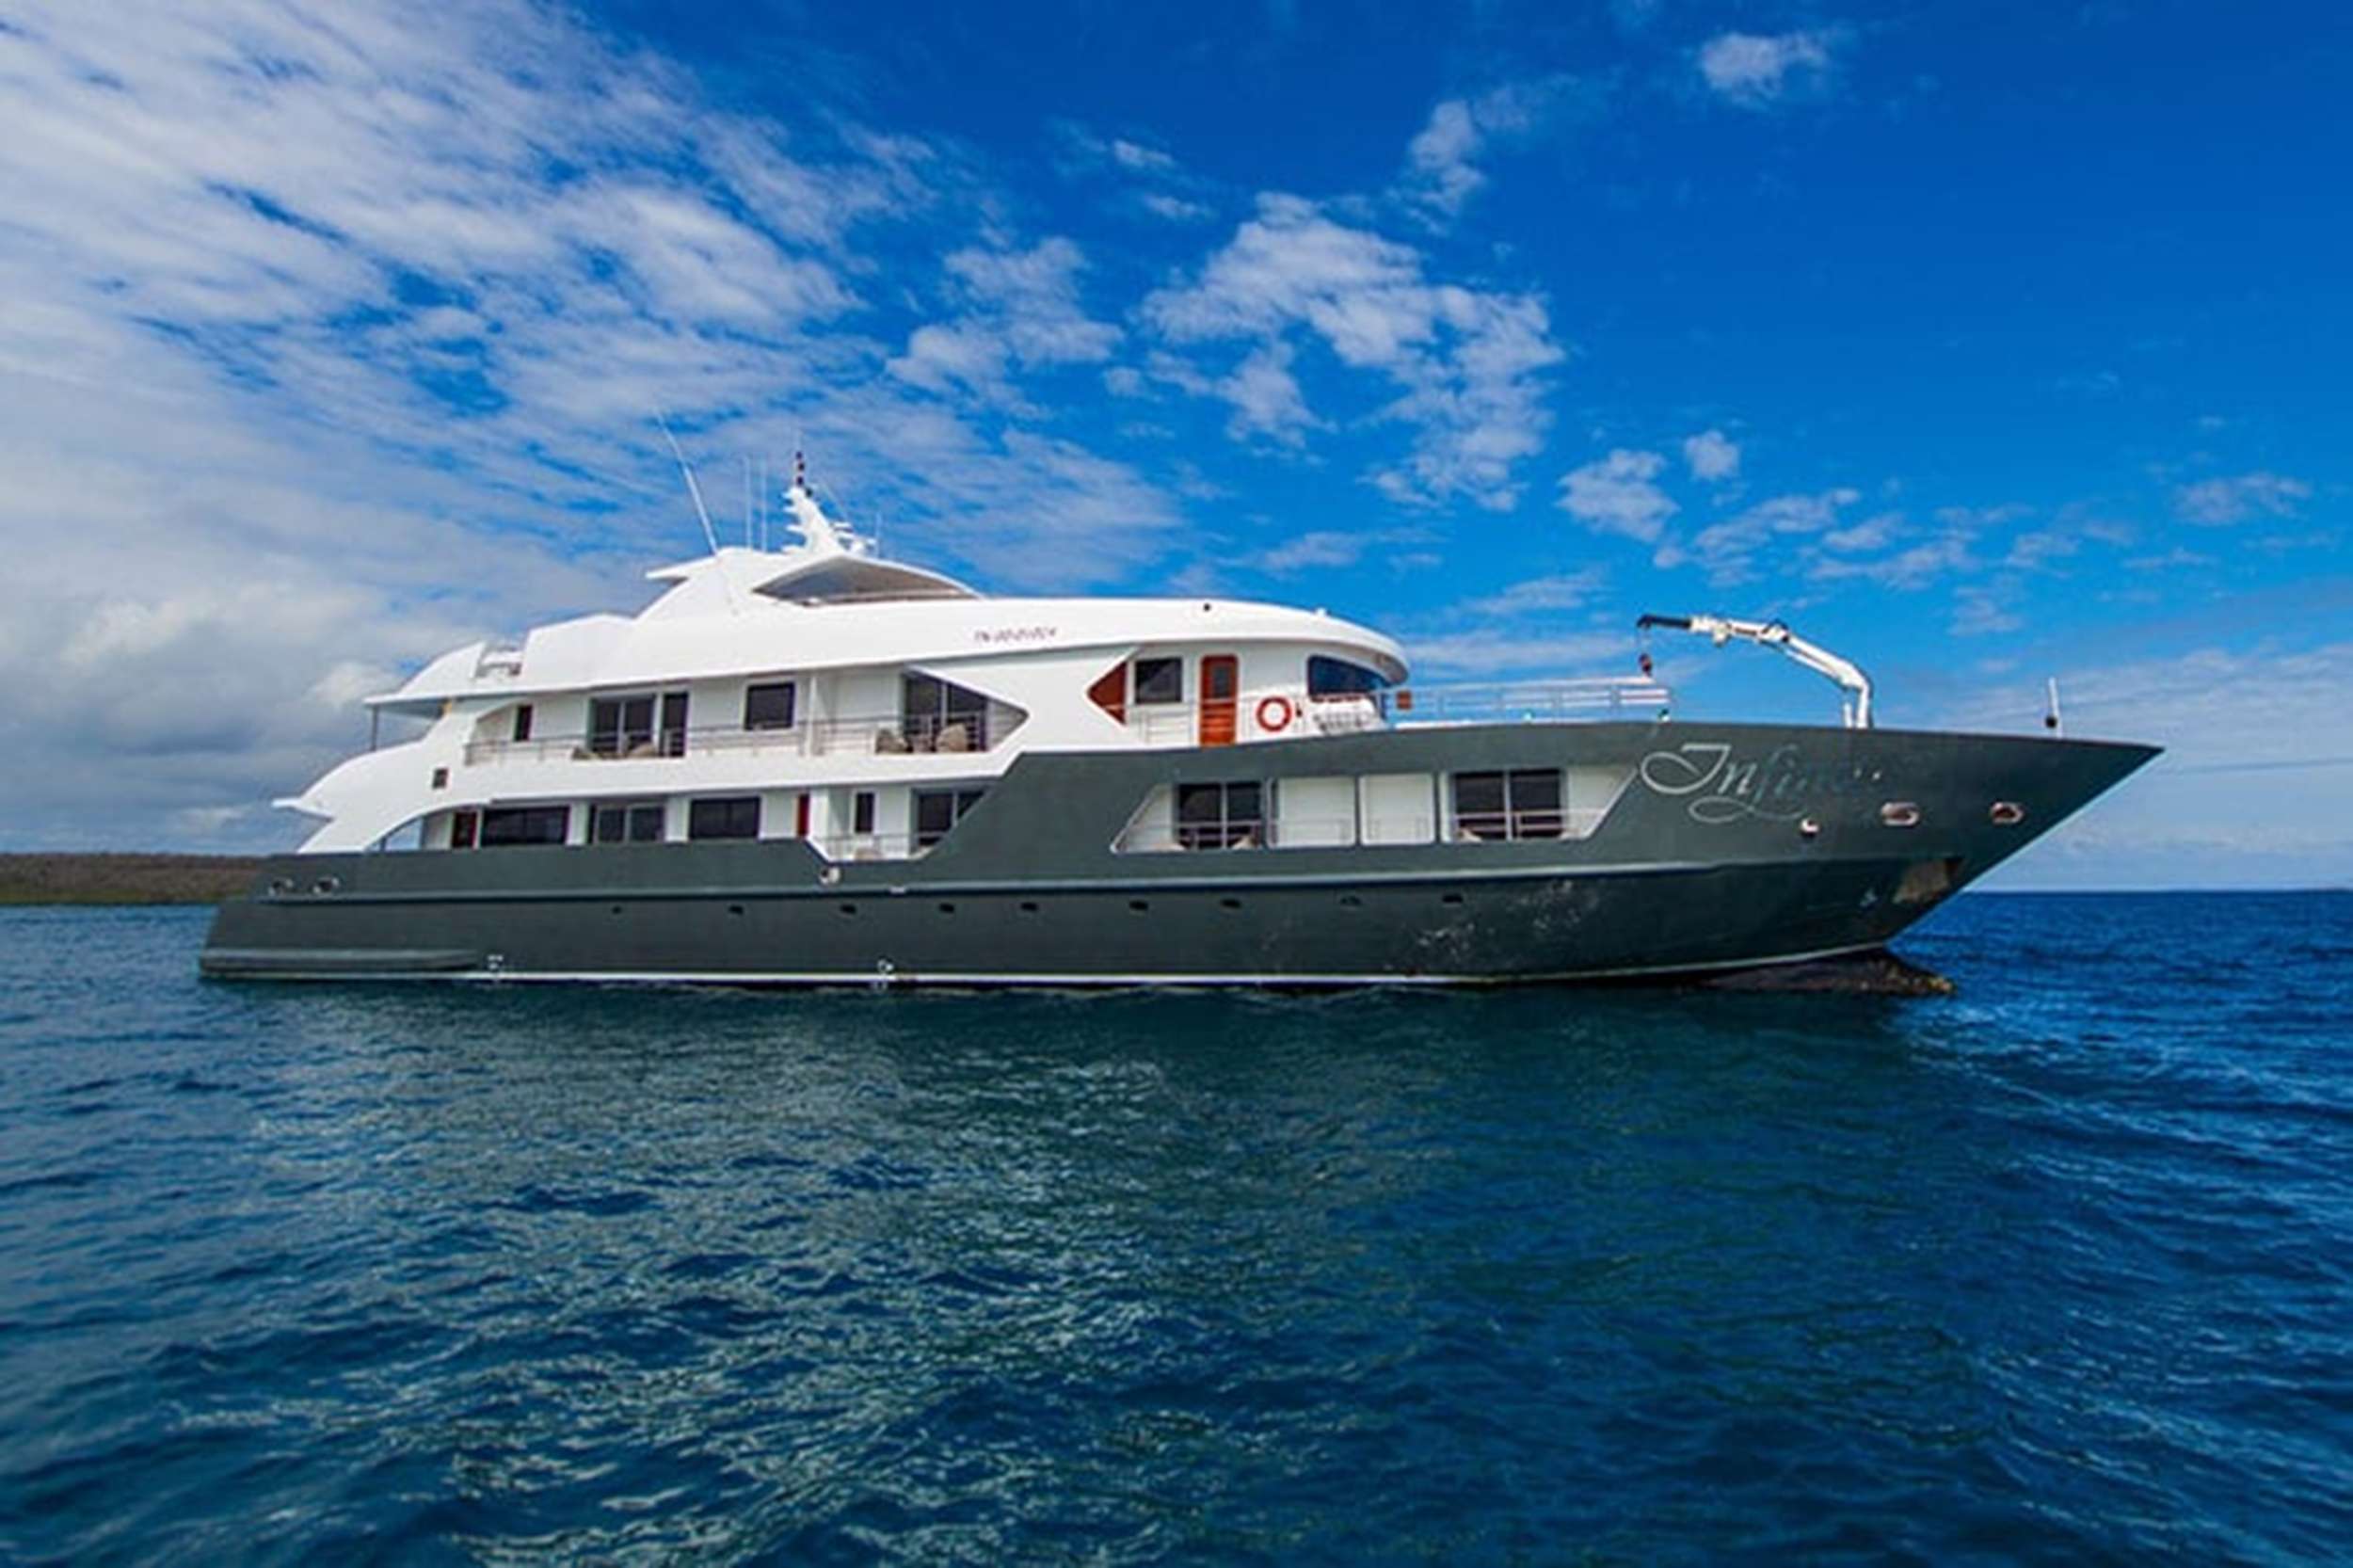 The Infinity is our most modern yacht (2018) with unrivaled spacious luxurious cabins and suites.

Outside dining and bar and also a solarium allow you to cruise the Galapagos in tremendous style and sumptuous luxury. All eight cabins and two suites have private balconies.

Main Deck: 6 double cabins (237ft&sup2; / 22m&sup2;, 226ft&sup2; / 21m&sup2; and 270ft&sup2; / 25m&sup2;), Dining room (1,216ft&sup2; / 113m&sup2;).

Upper Deck: 2 double cabins (247.5ft&sup2; / 23m&sup2;), 2 double Suites (360.6ft&sup2; / 33.5m&sup2; and 376.7ft&sup2; / 35m&sup2;).

All cabins with private balconies, hot water and air-conditioning